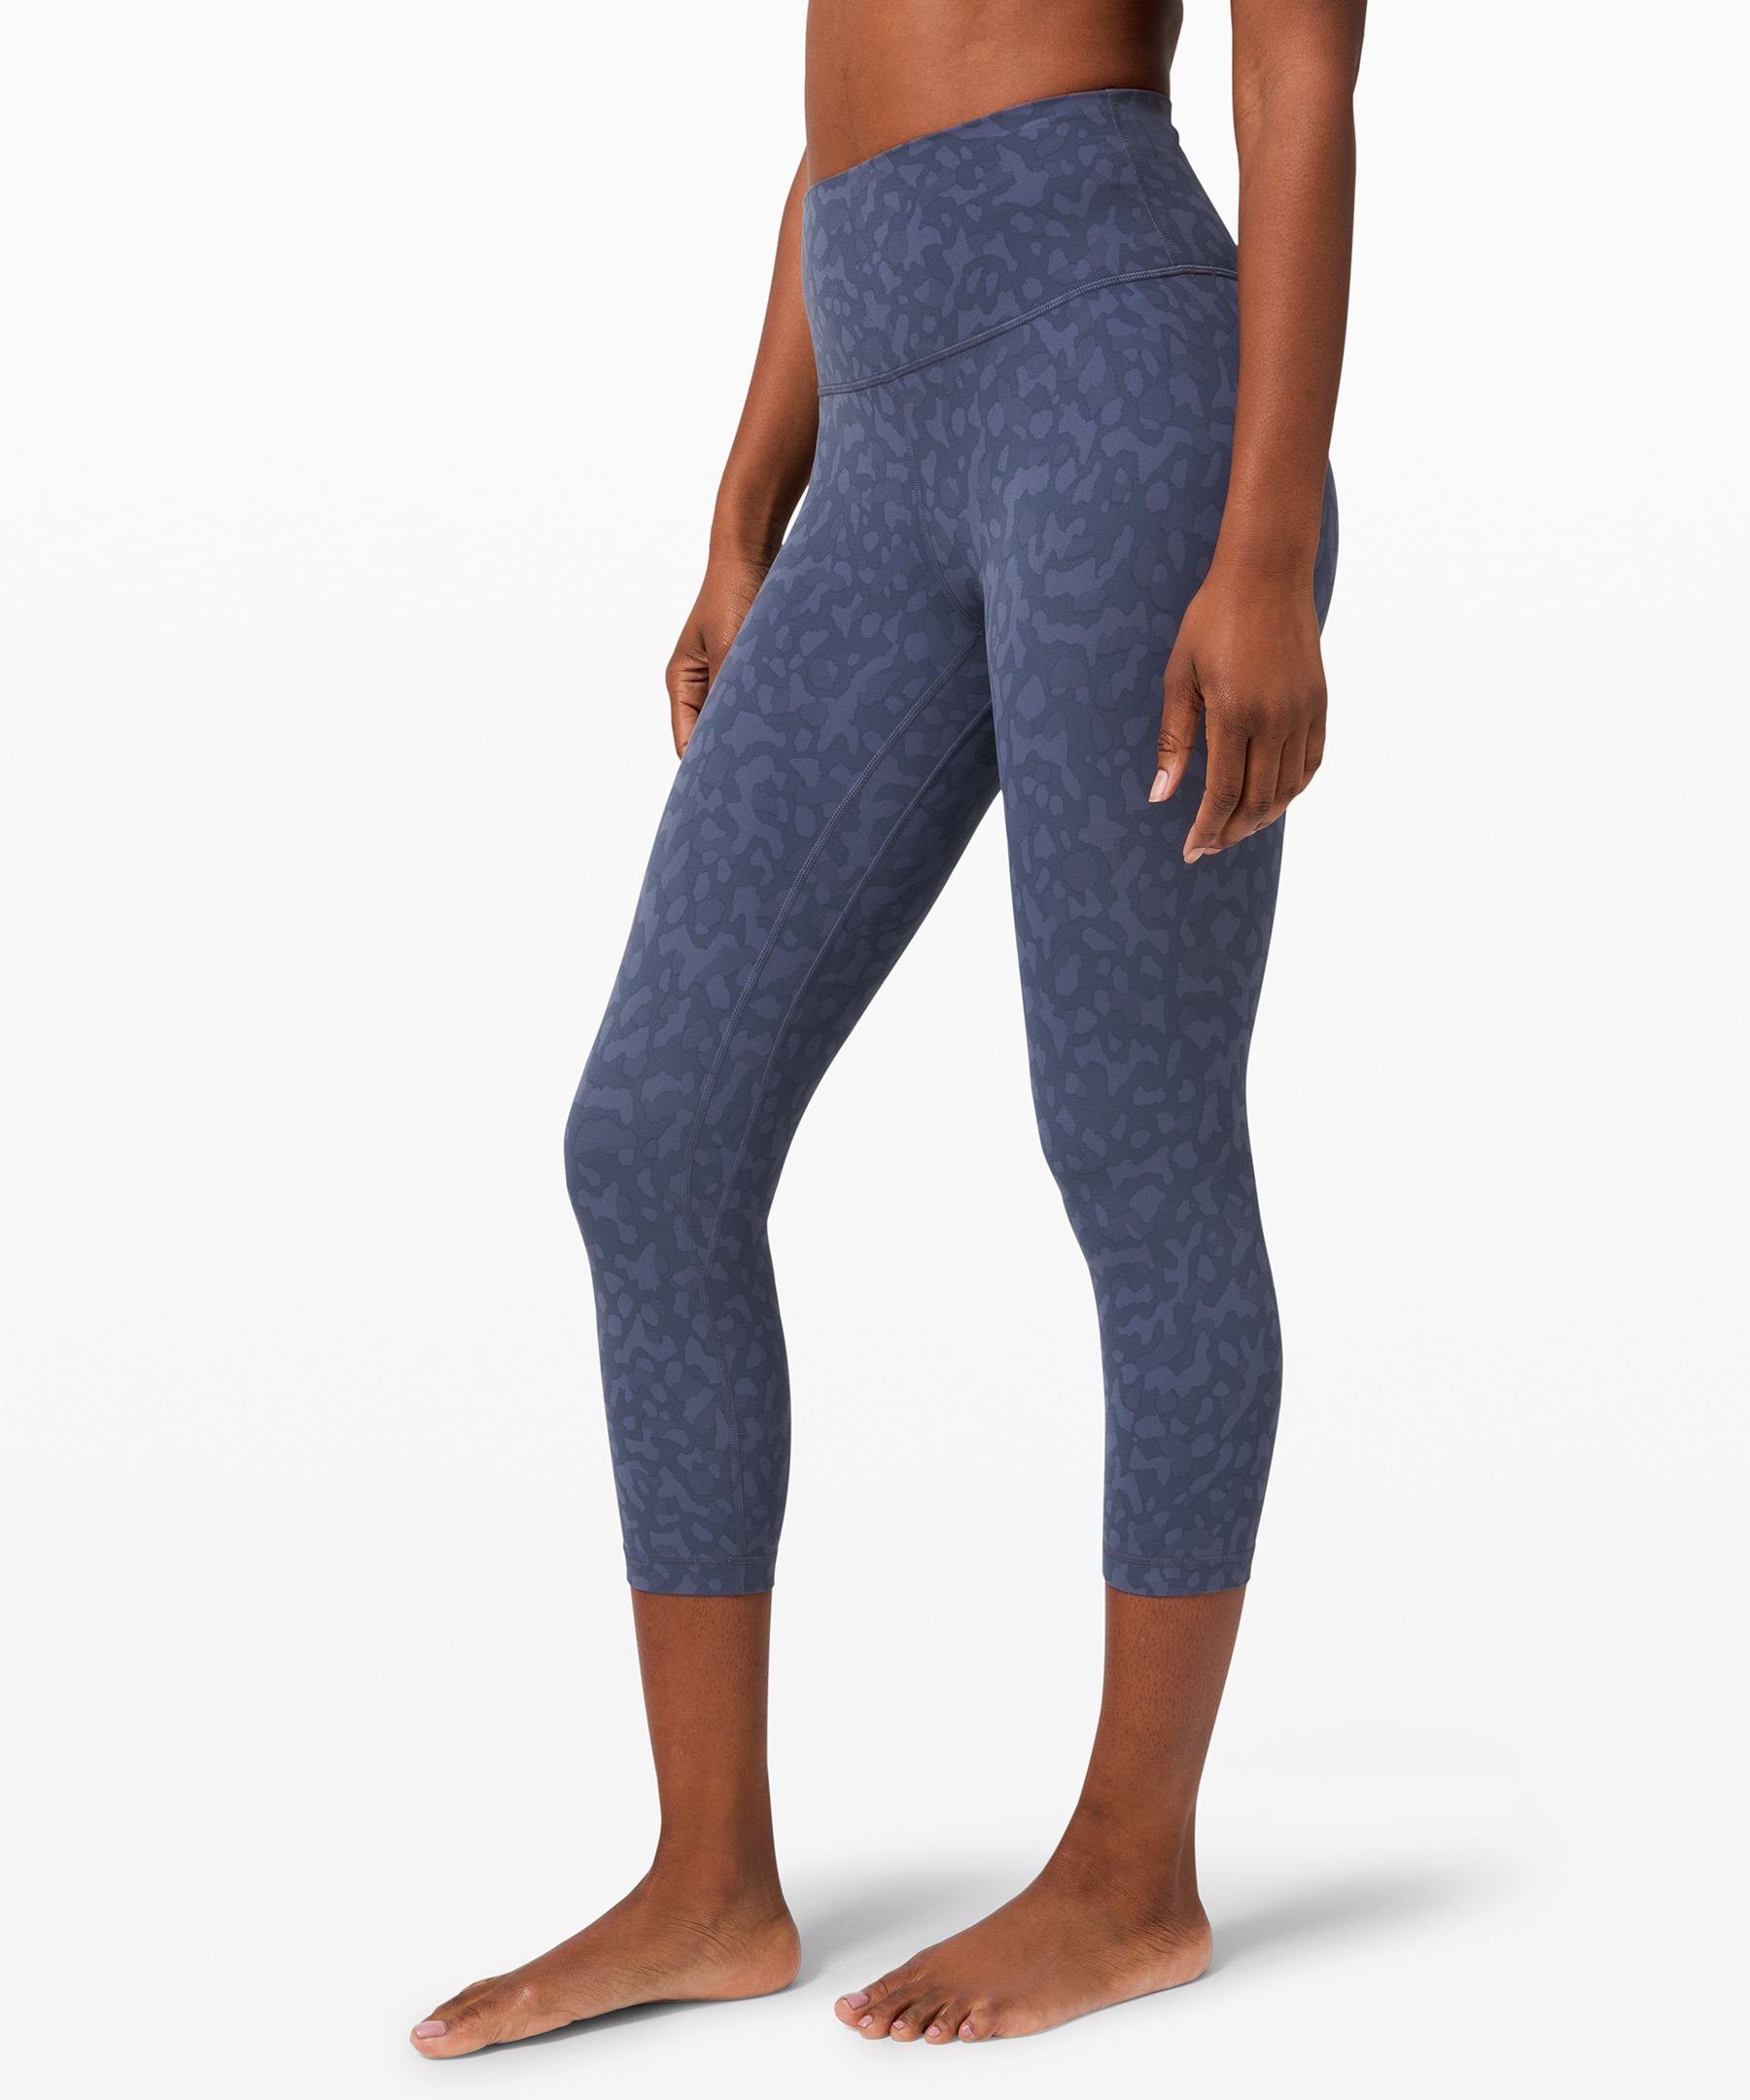 Lululemon Align Super High-Rise Crop 21 - Wee Are From Space